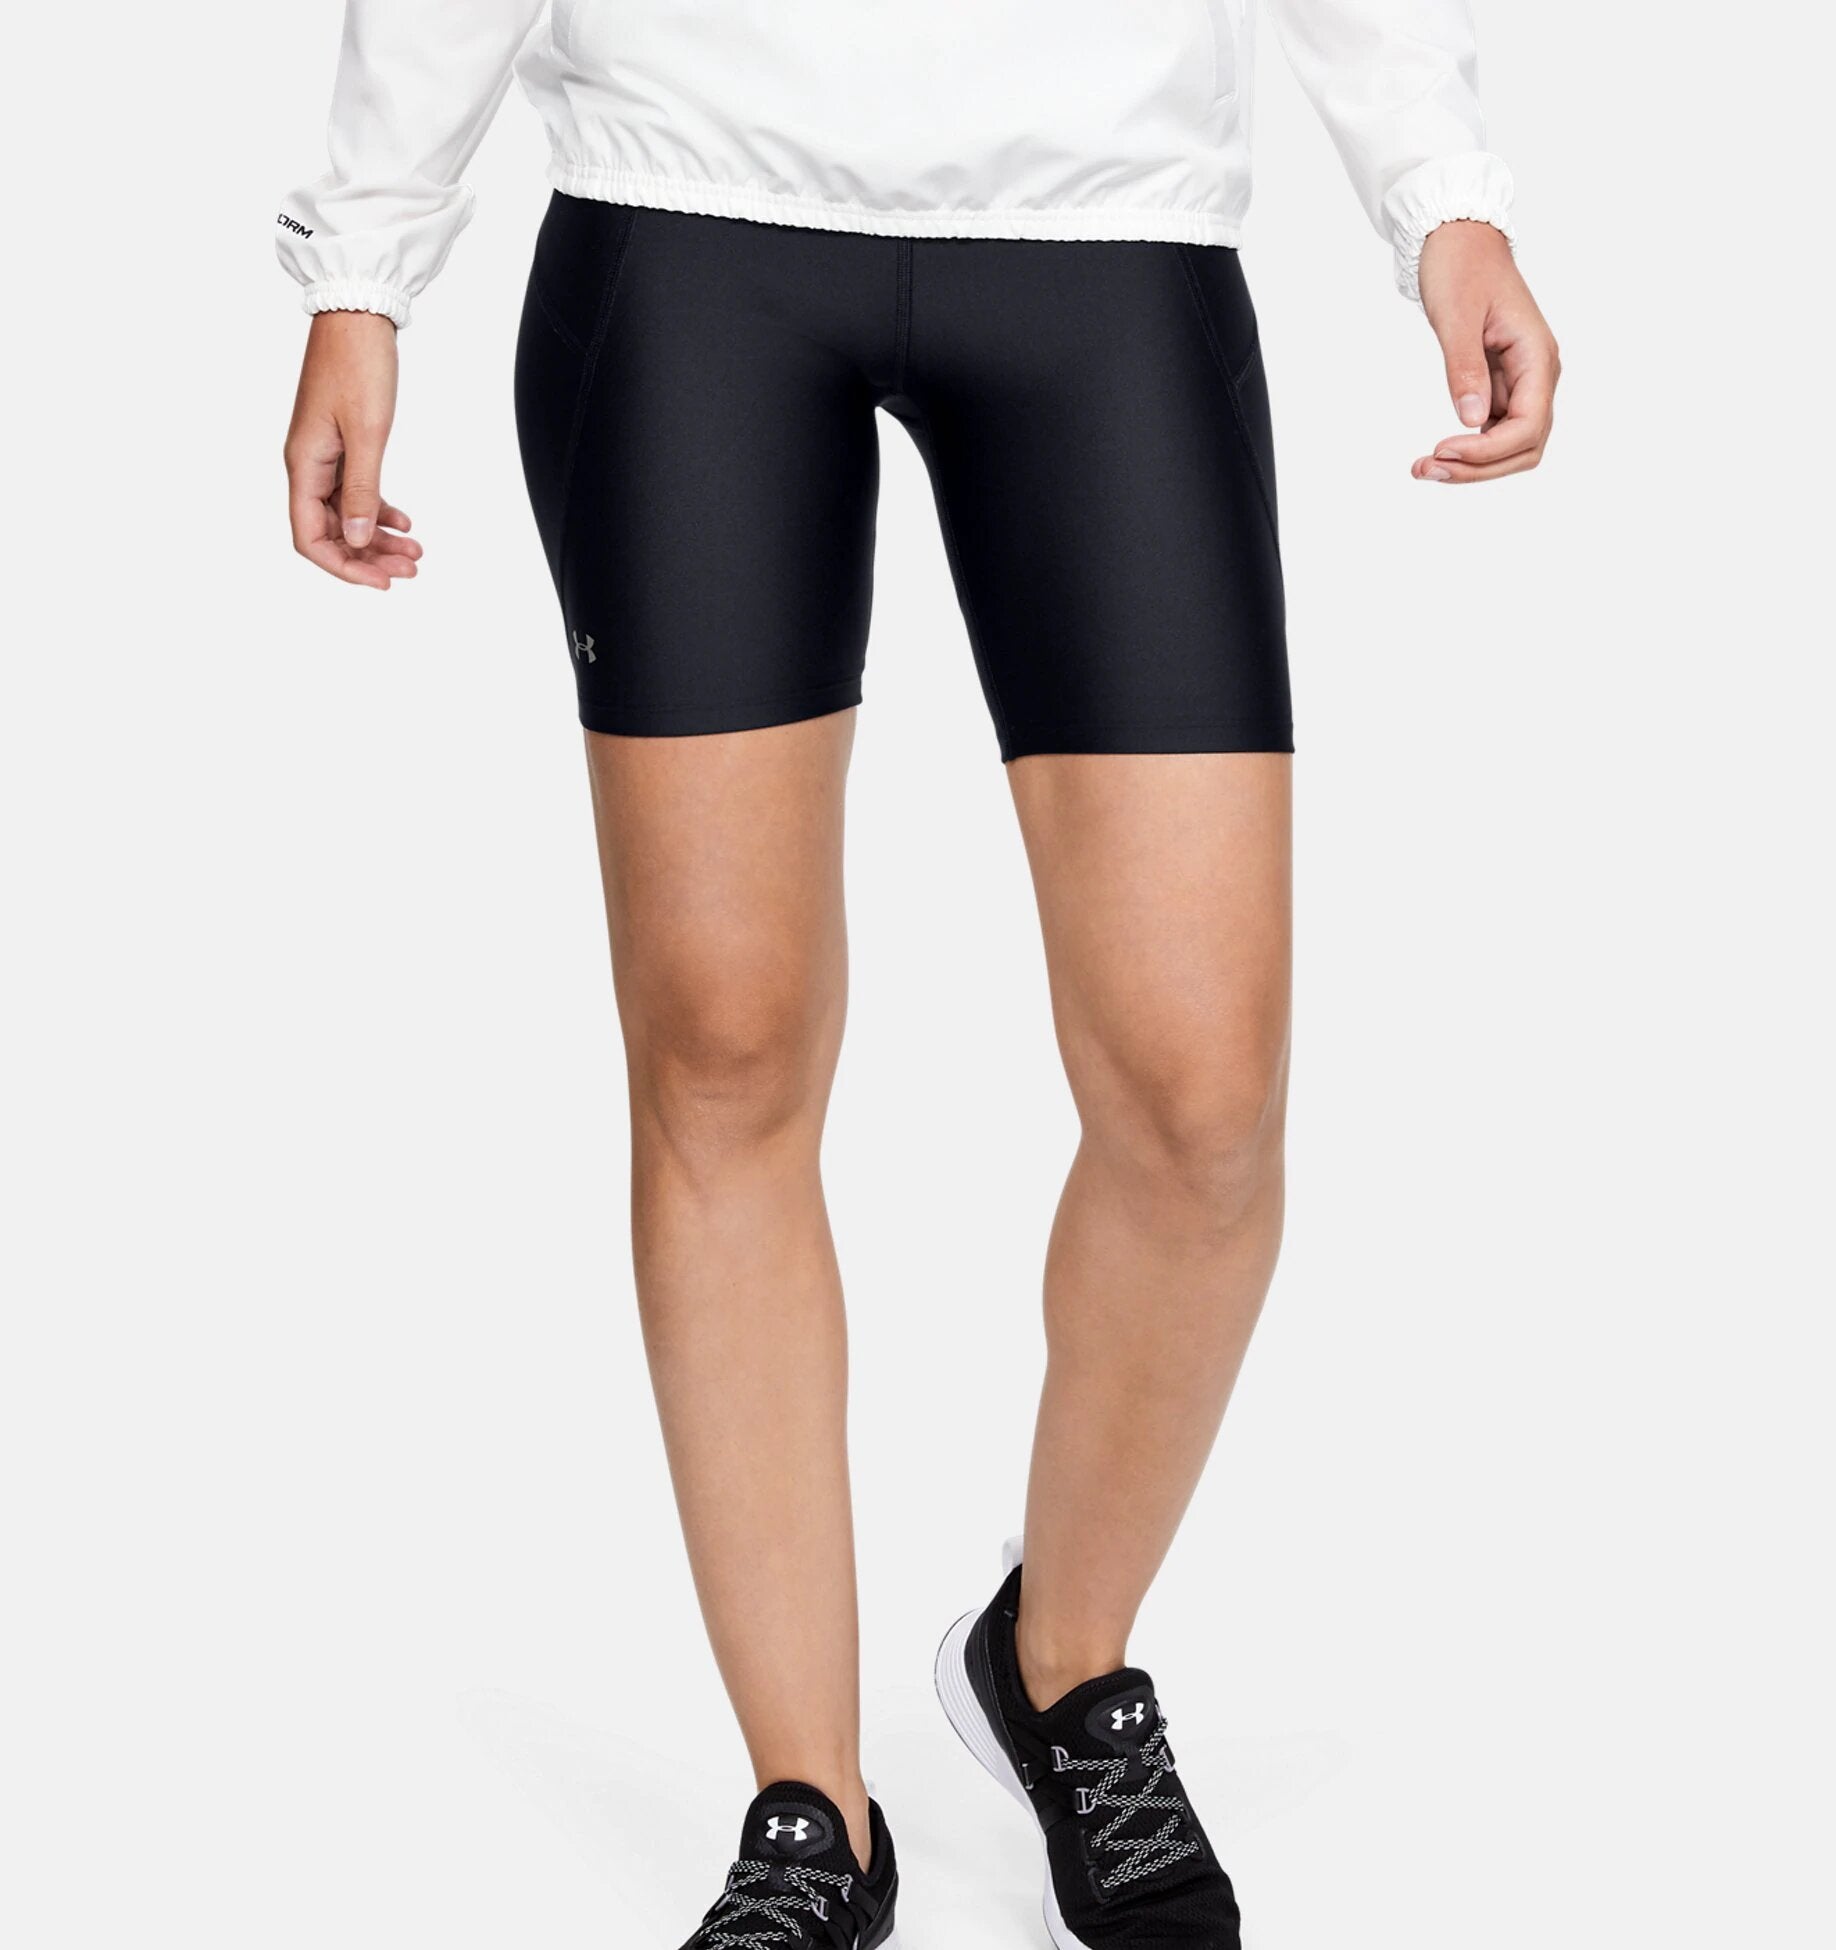 cycling outfit women's